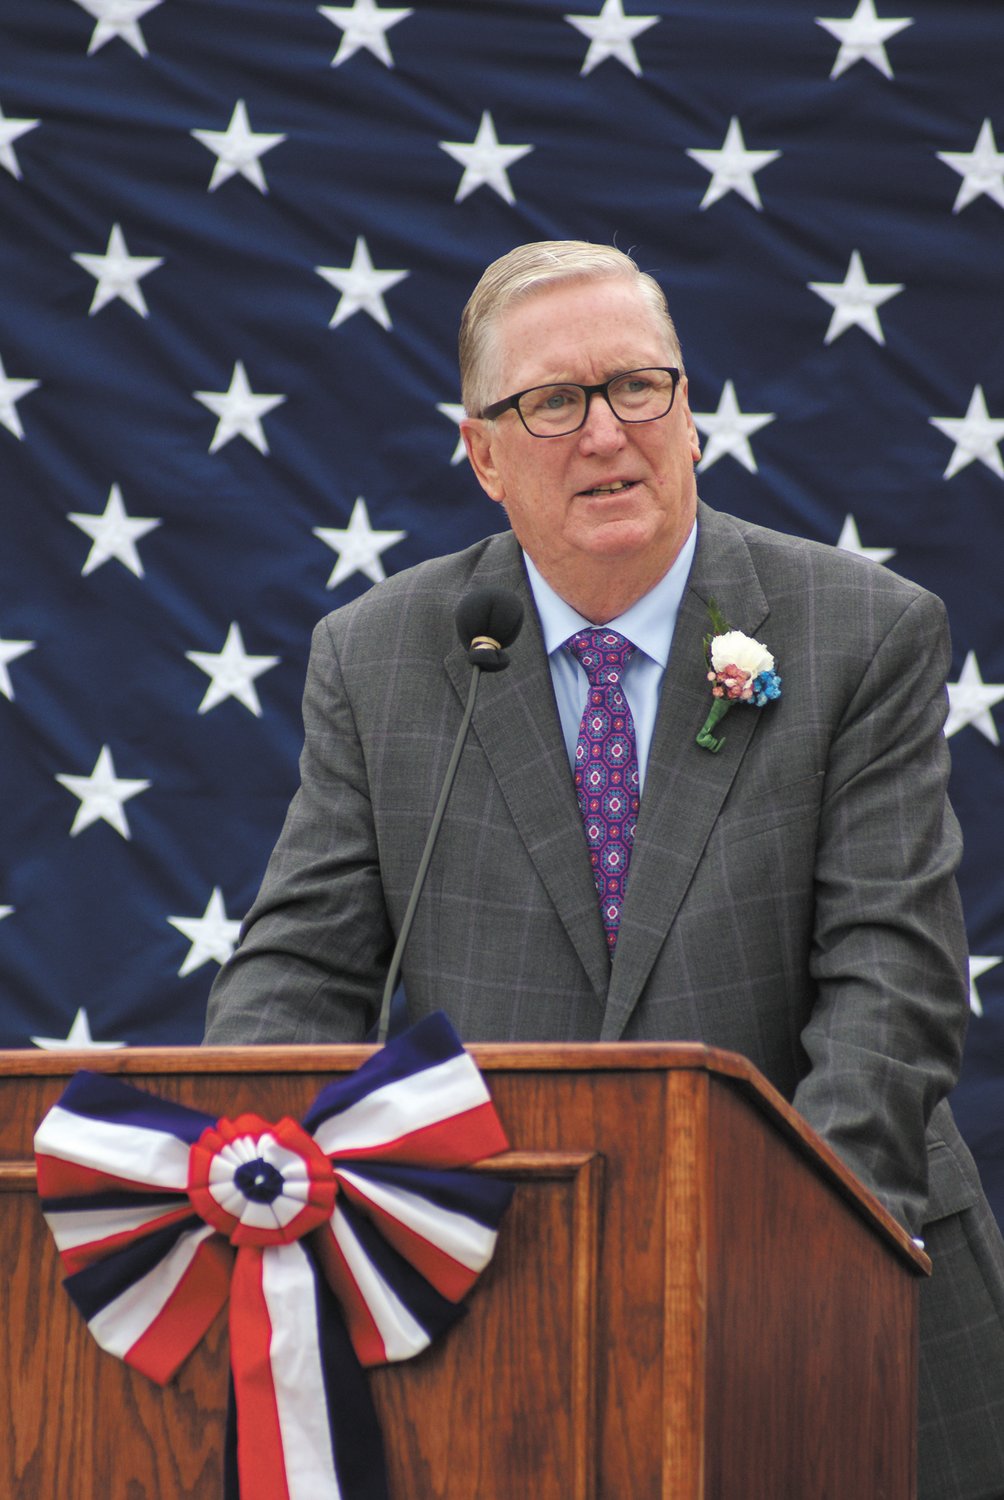 SPEAKING ABOUT HIS HEROES: Cranston Mayor Ken Hopkins spoke during the Memorial Day Ceremony and told students his father and his father-in-law who both served in WWII.